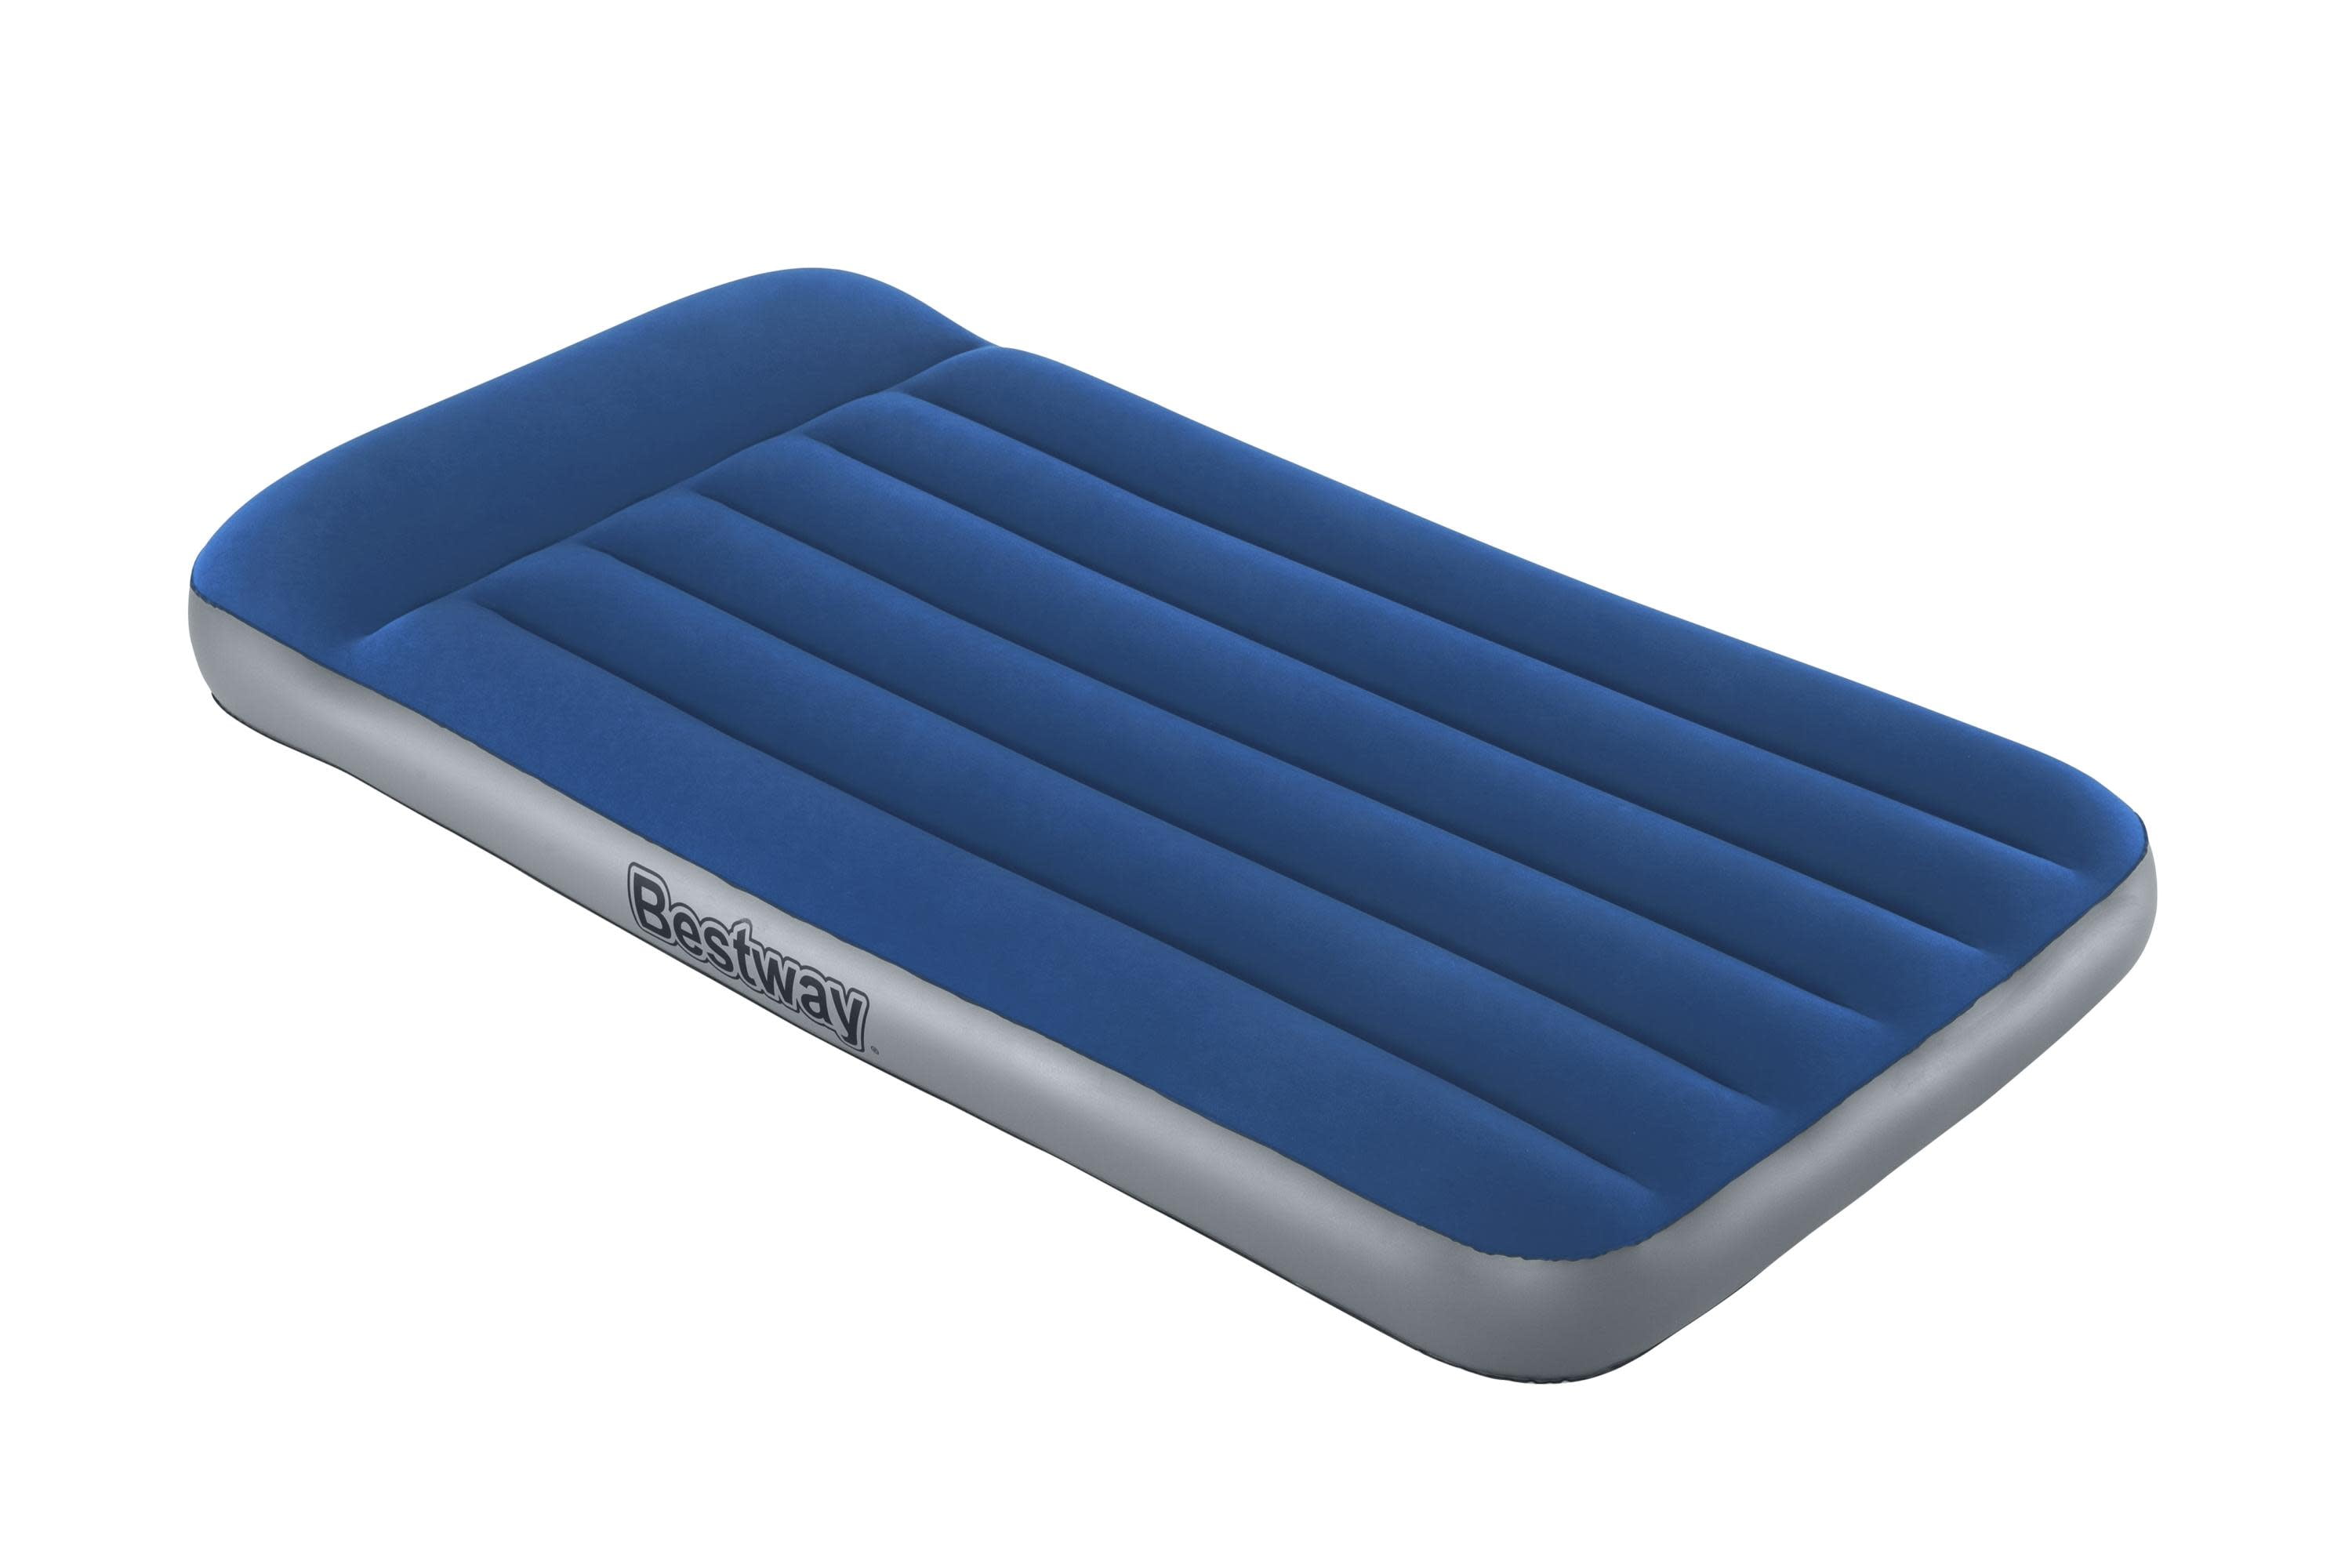 12" Air Mattress w/ Built-in Pump & Repair Patch Inflatable Soft-Top Airbeds 